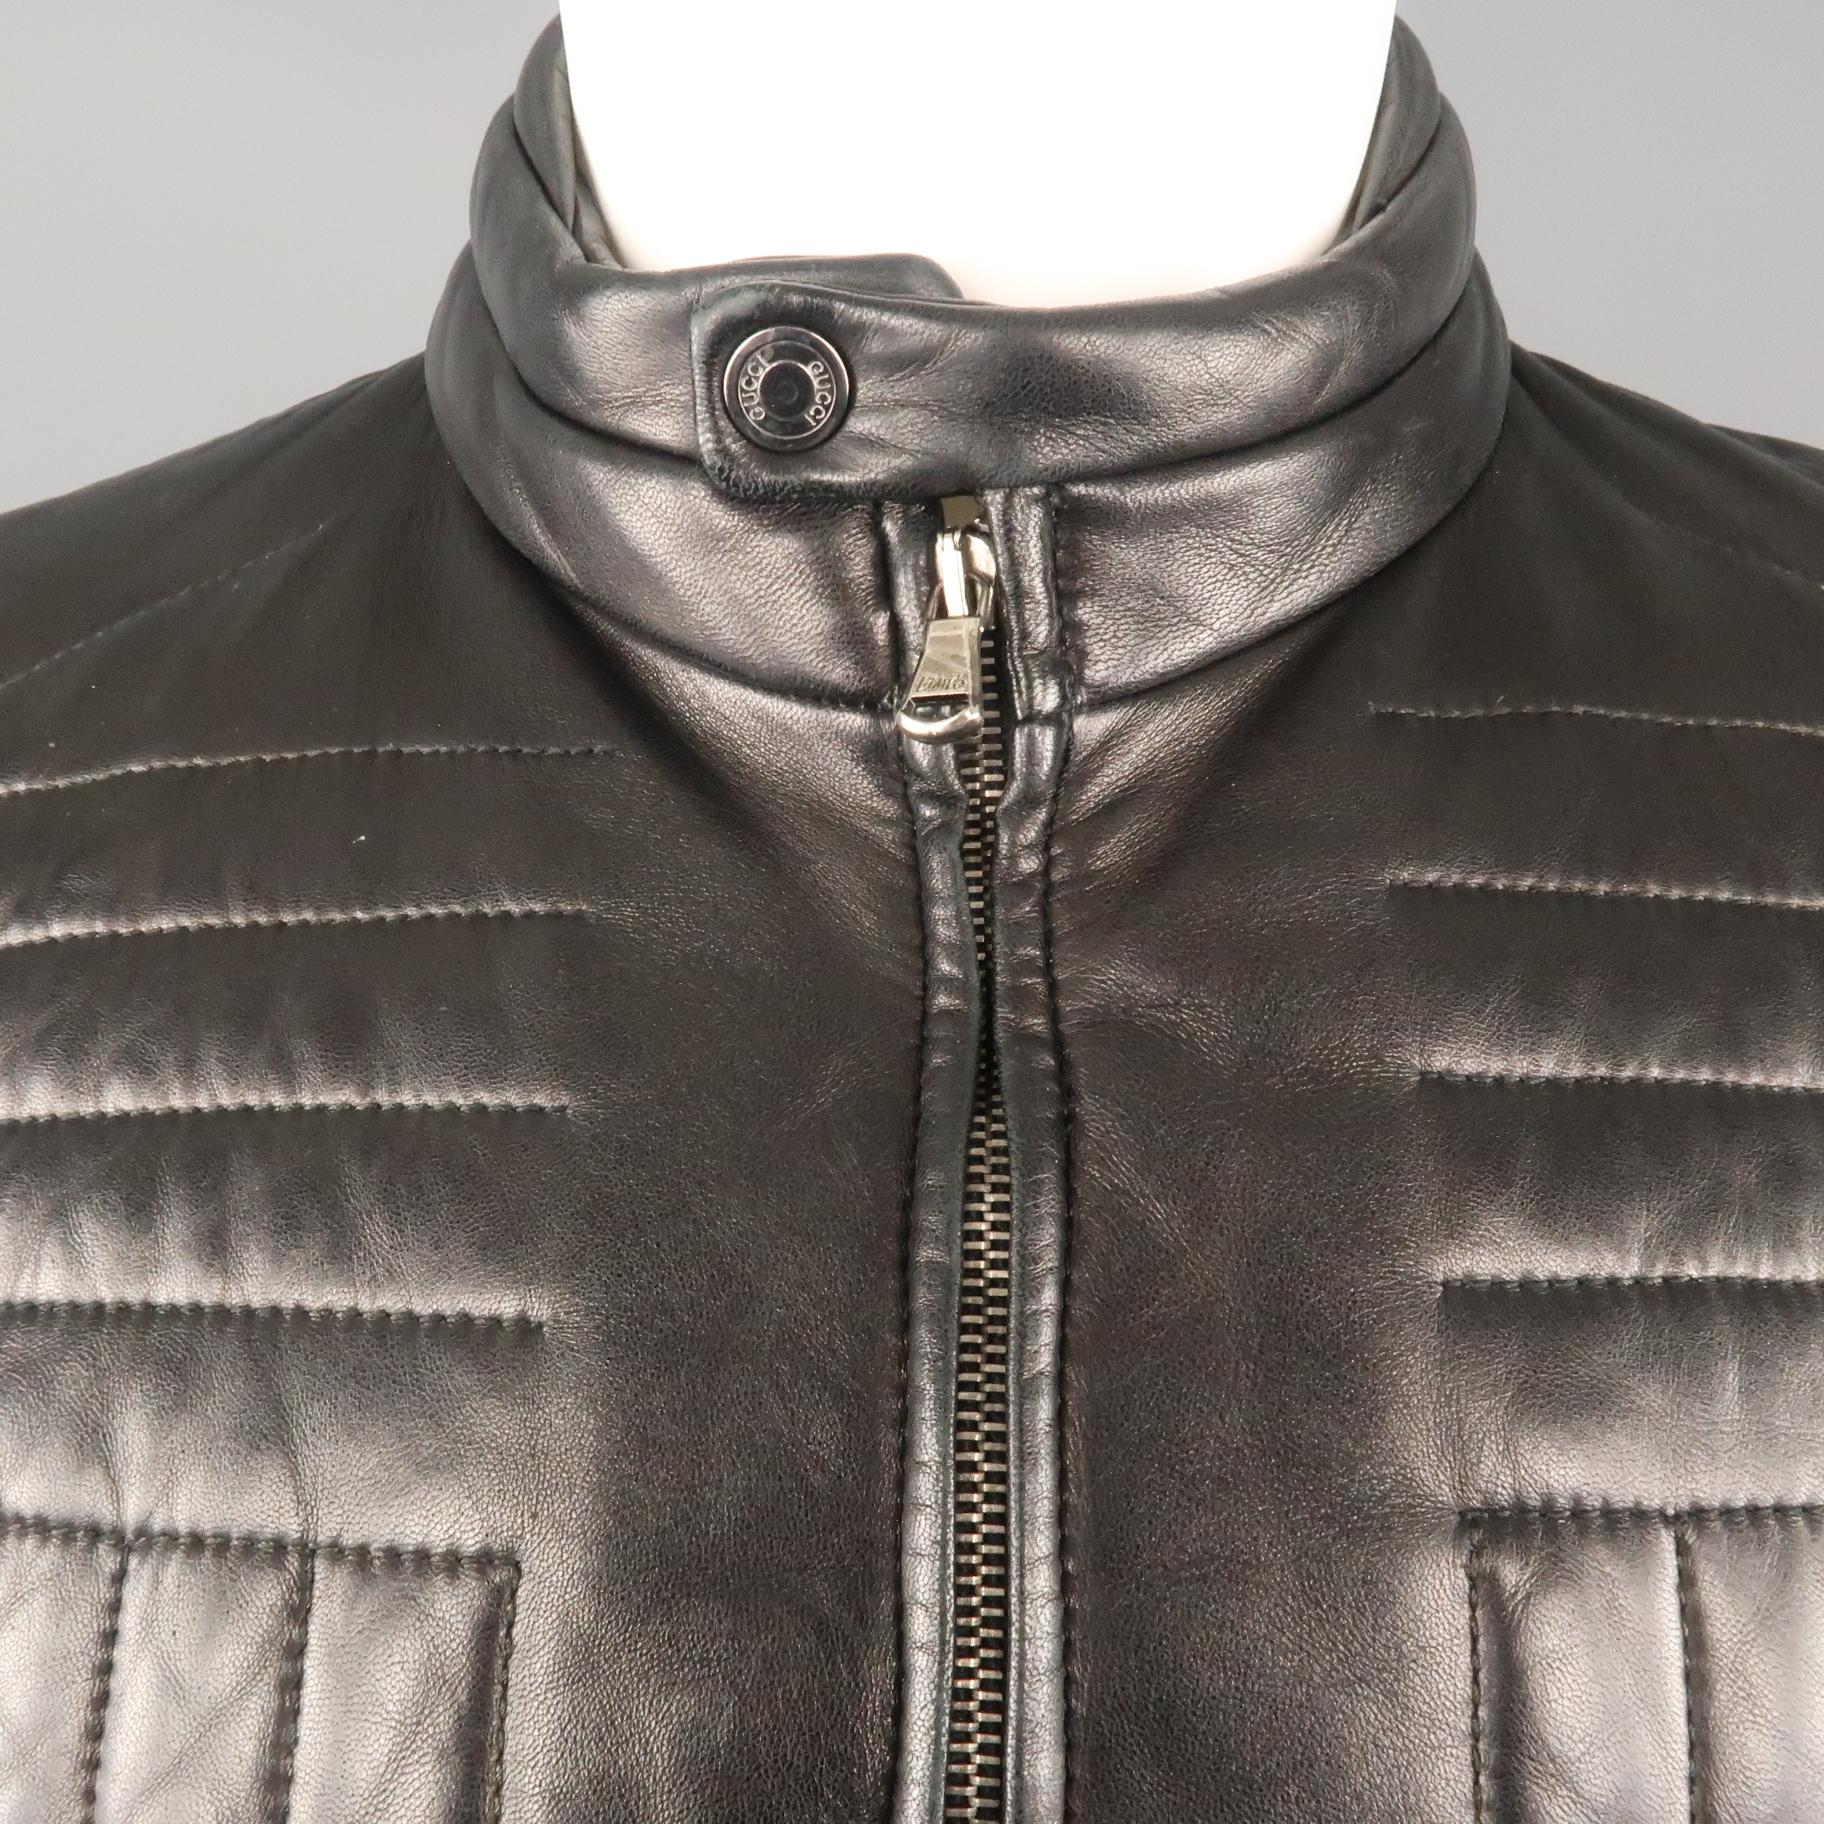 Archive GUCCI by TOM FORD motorcycle jacket comes in smooth black leather with a band snap collar, double zip front, and directional quilting details. With tag. Made in Italy.
 
Very Good Pre-Owned Condition.
Marked: IT 48
 
Measurements:
